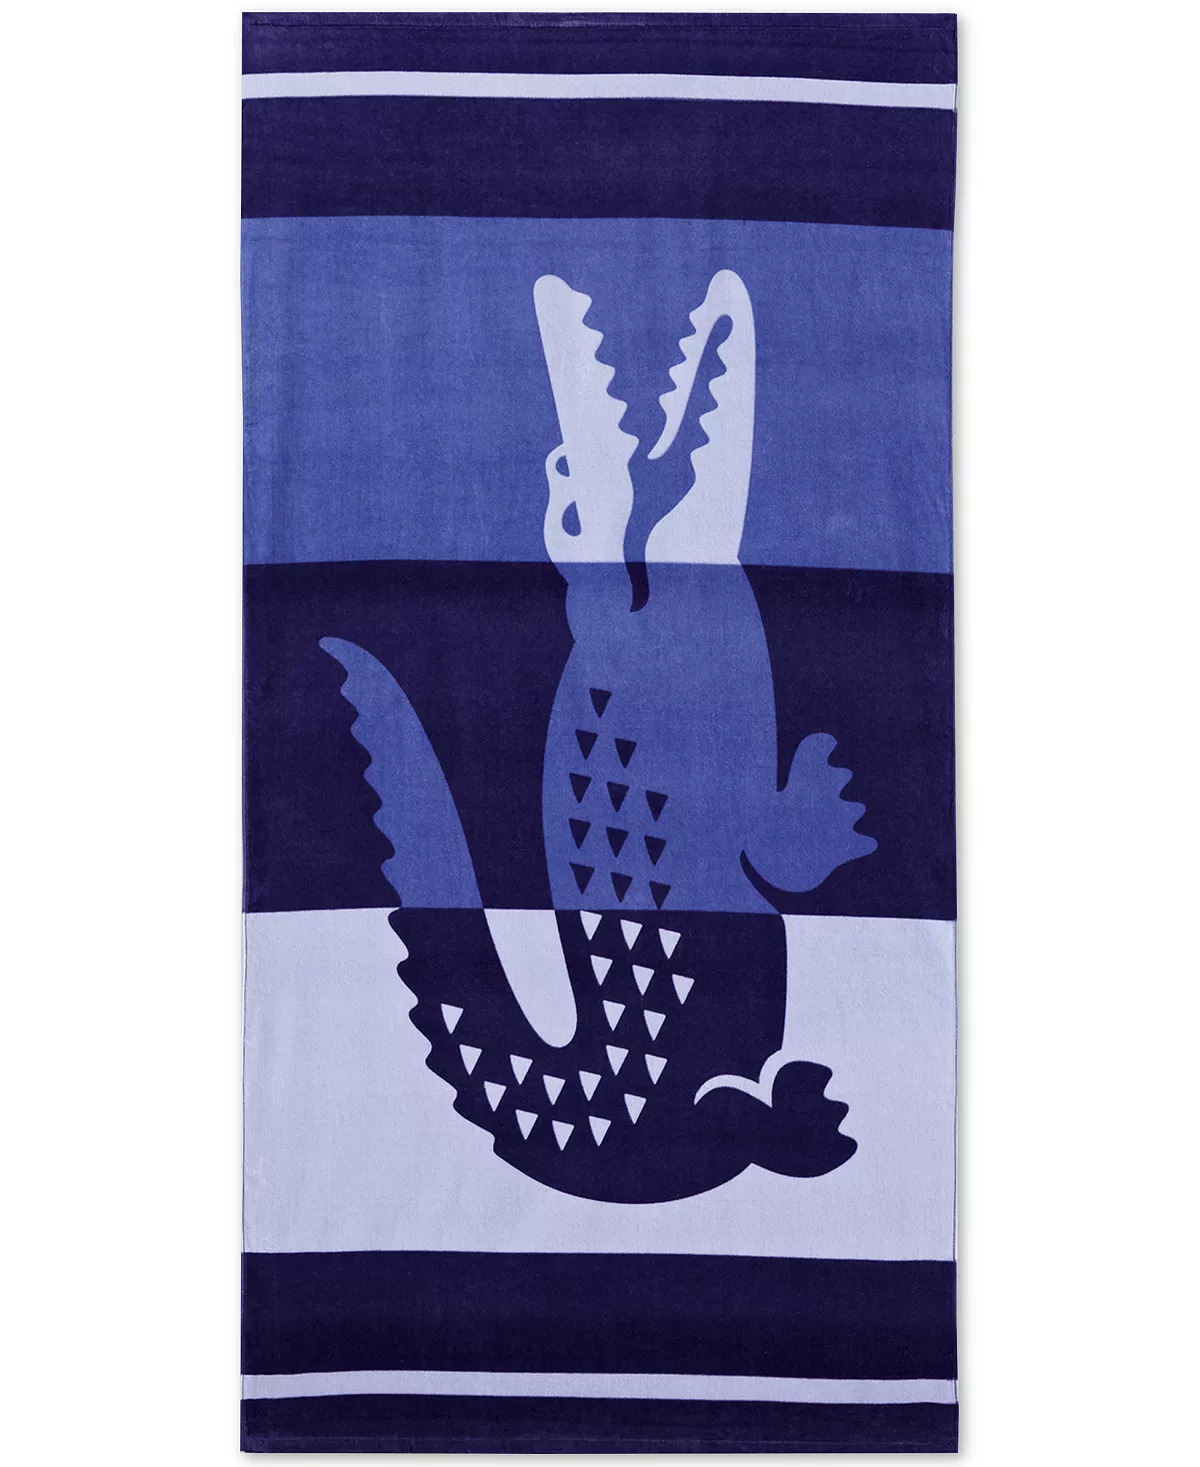 Lacoste Home Duke Cotton Beach Towel or Tommy Hilfiger Beach Towel (various colors) & More $12 + Free In-Store Pickup at Macys or Free Shipping on $25